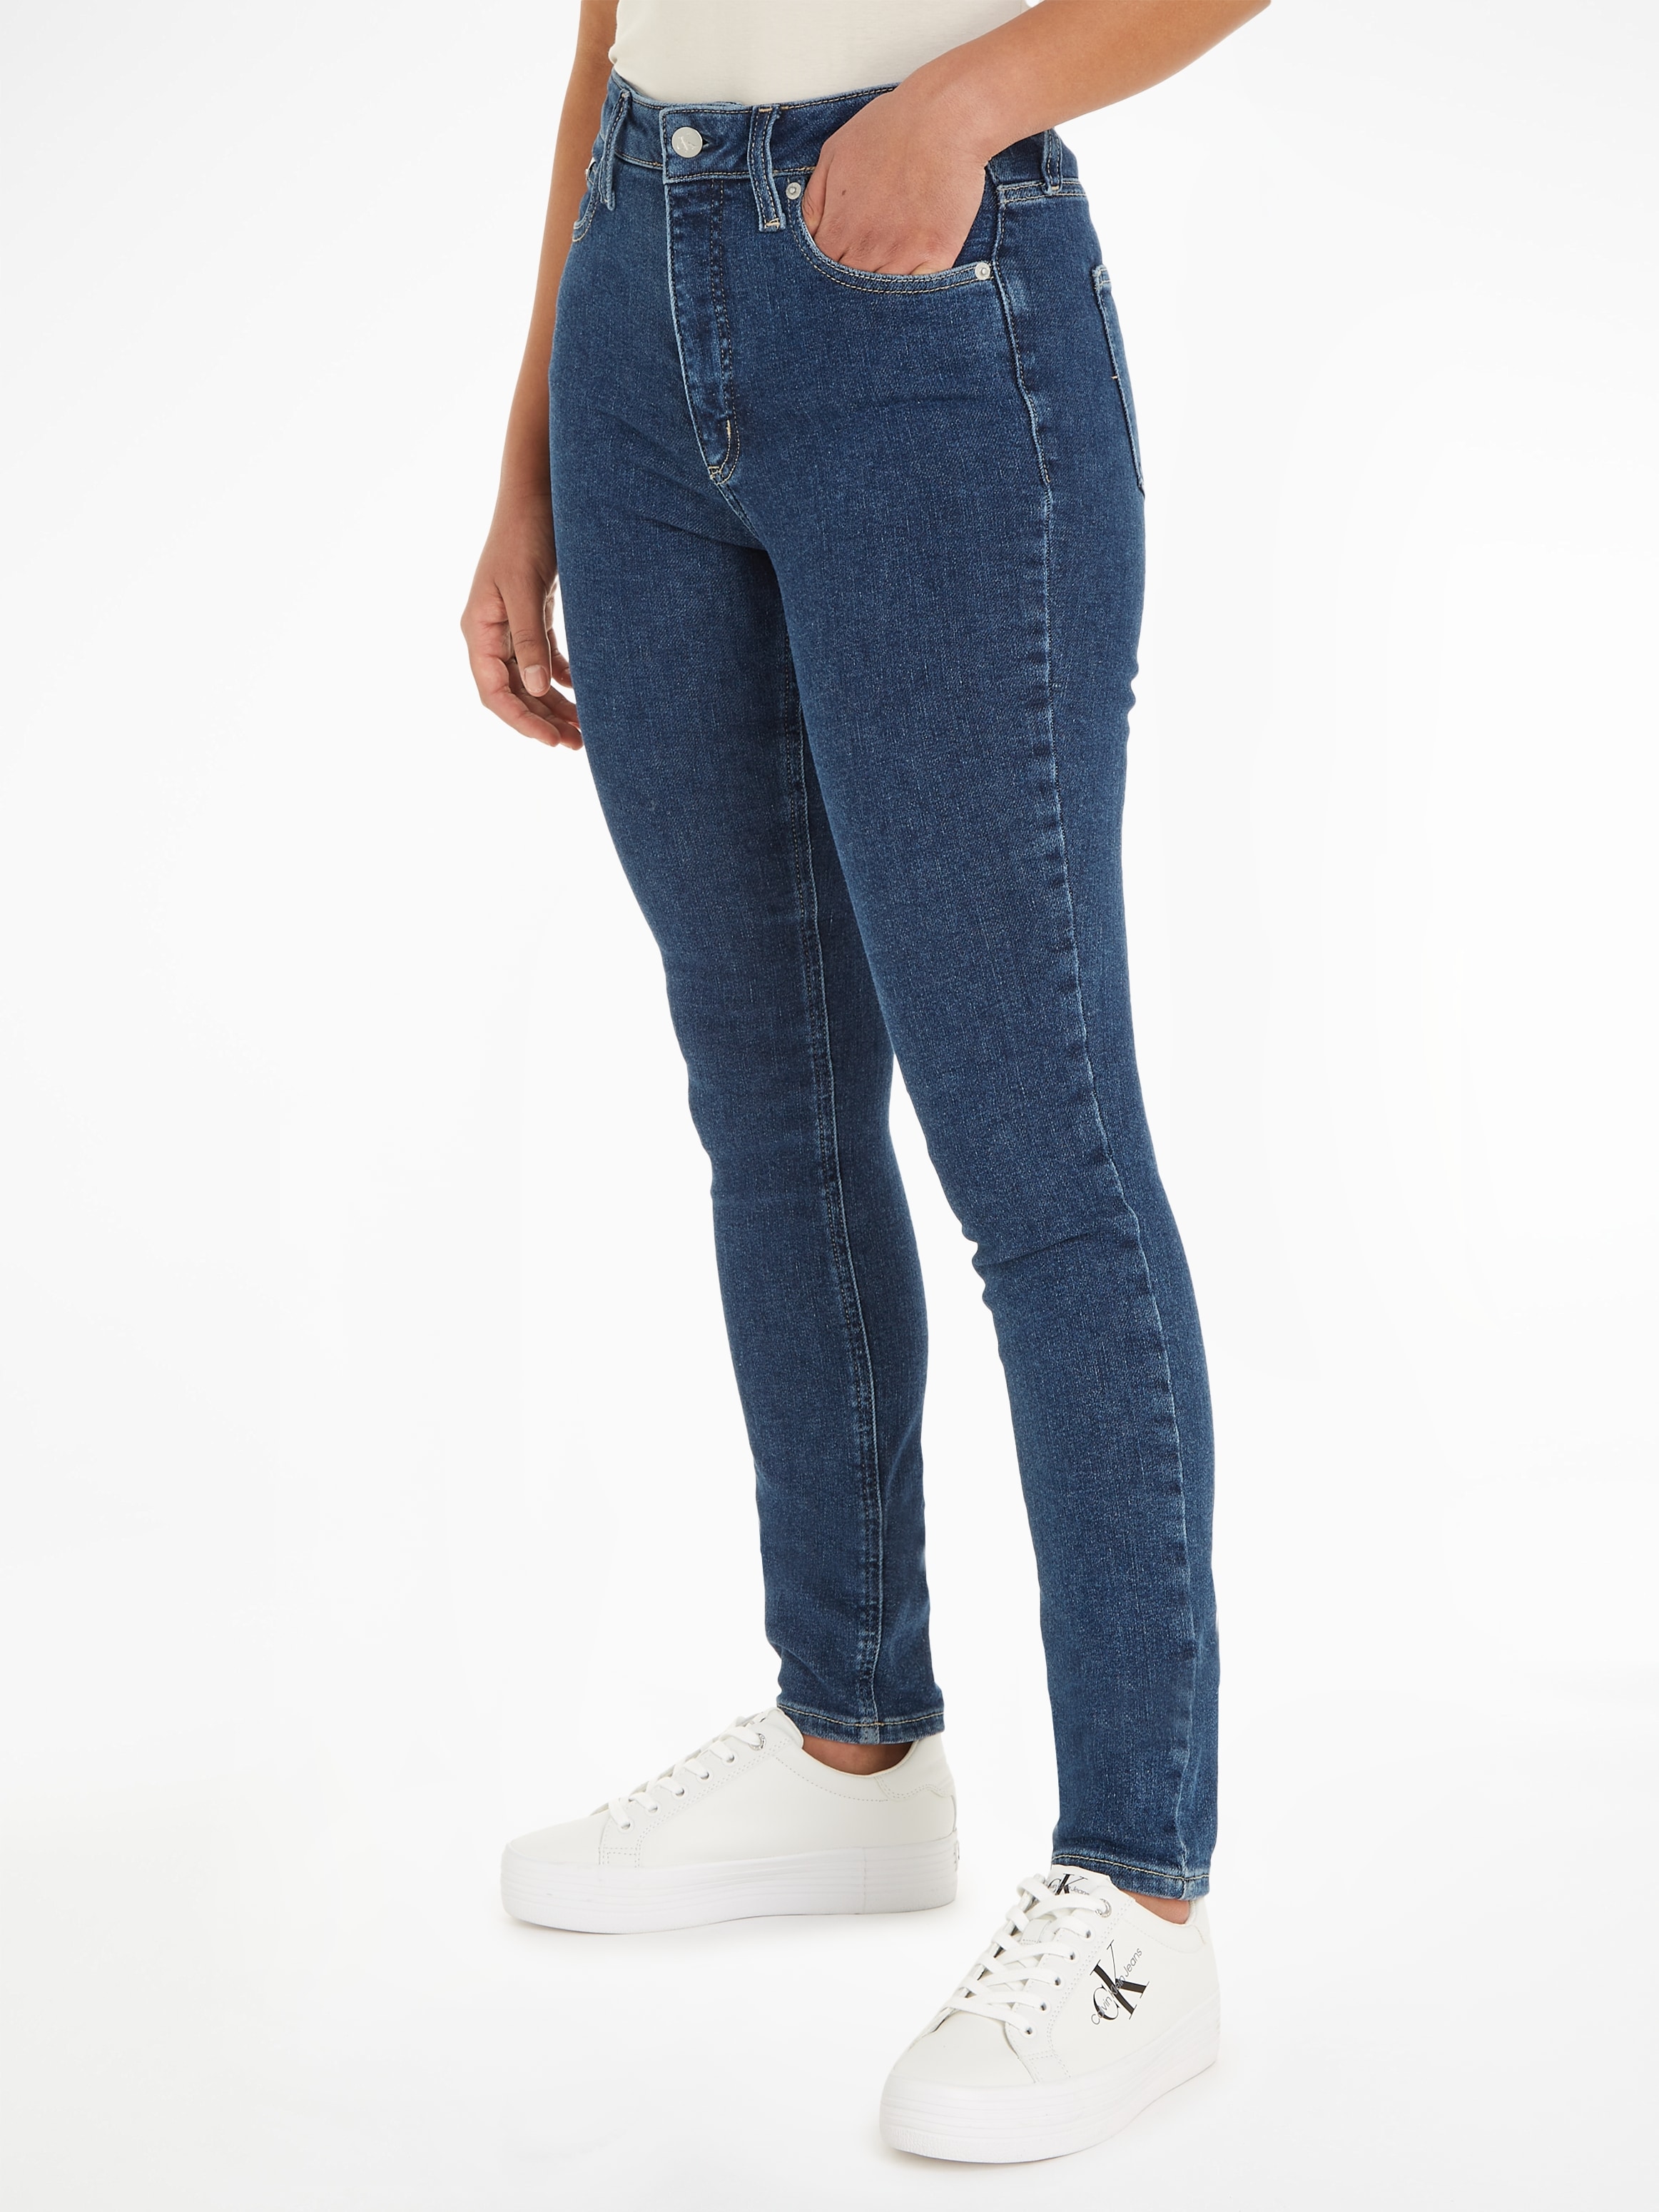 5-Pocket-Style Calvin bei Klein kaufen Jeans OTTO im RISE SKINNY«, Skinny-fit-Jeans »HIGH